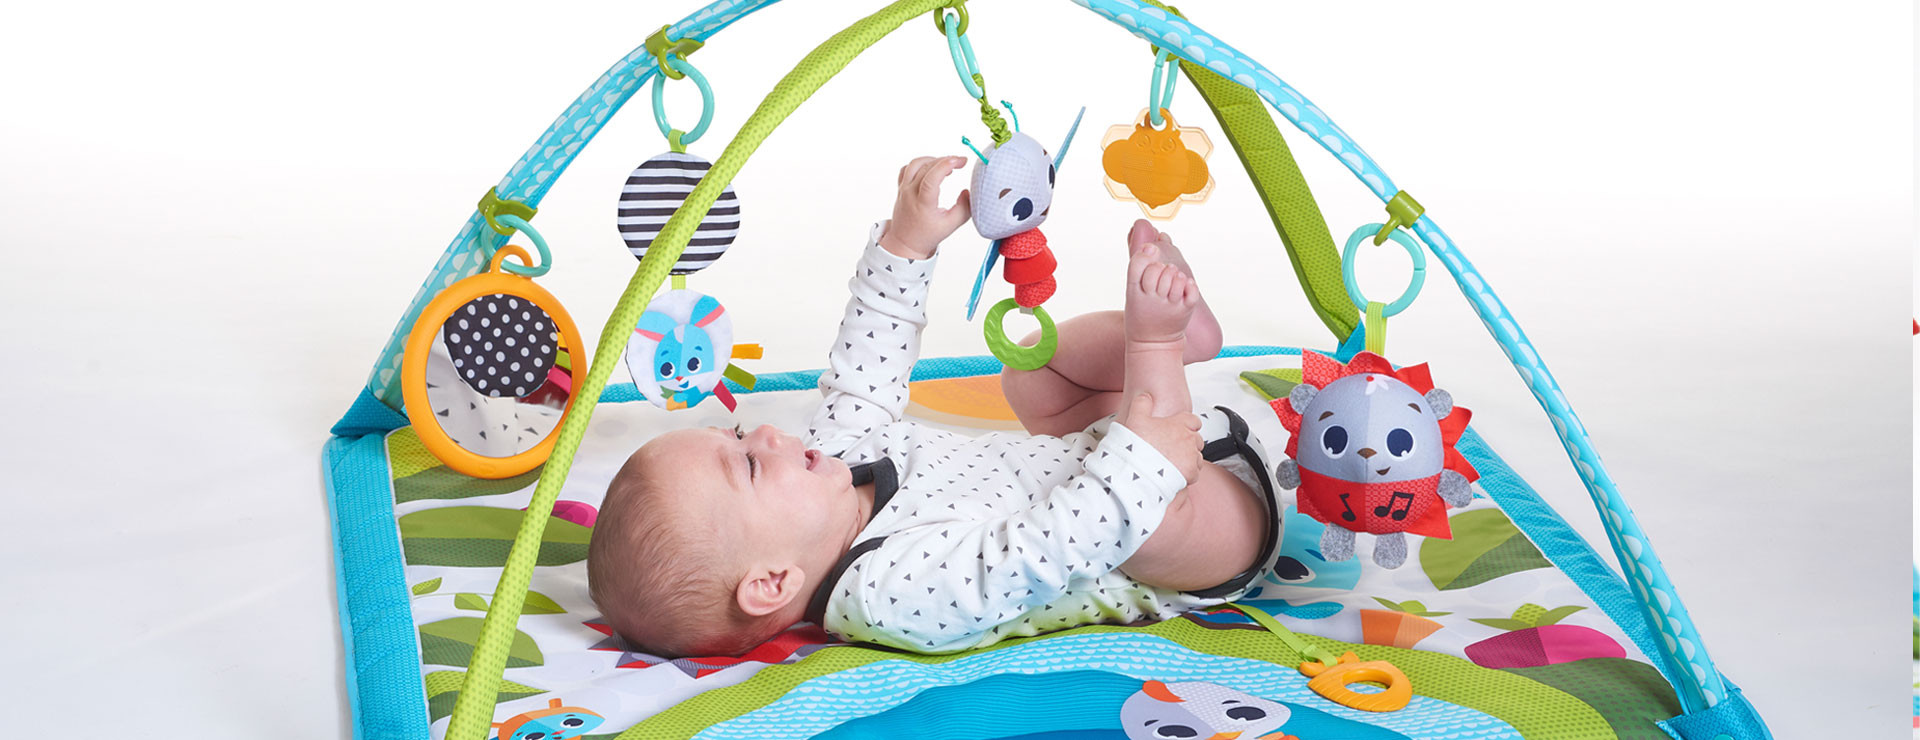 Overhead gym mode helps focus baby’s attention while on their back